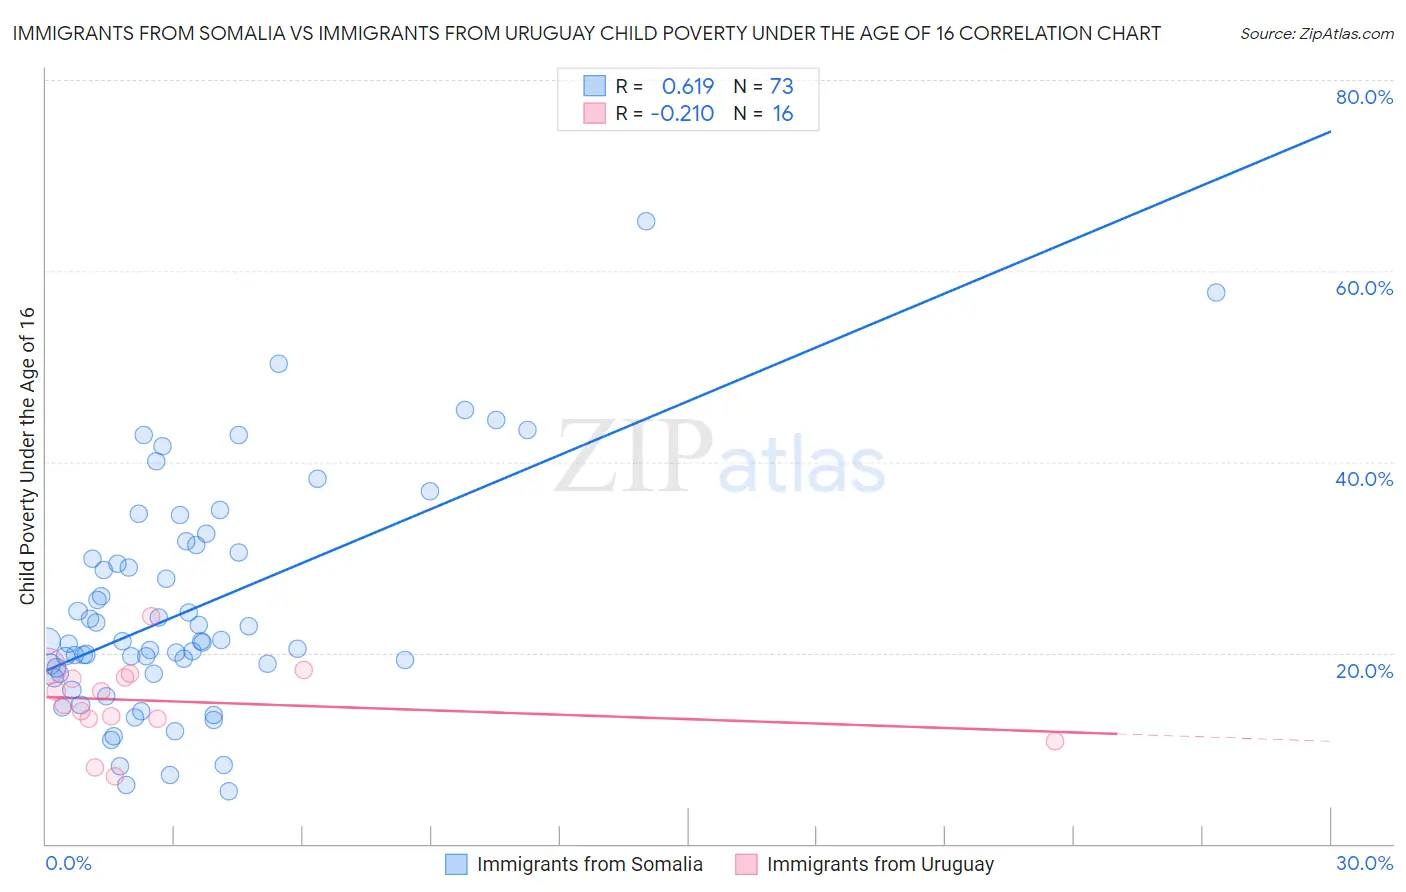 Immigrants from Somalia vs Immigrants from Uruguay Child Poverty Under the Age of 16